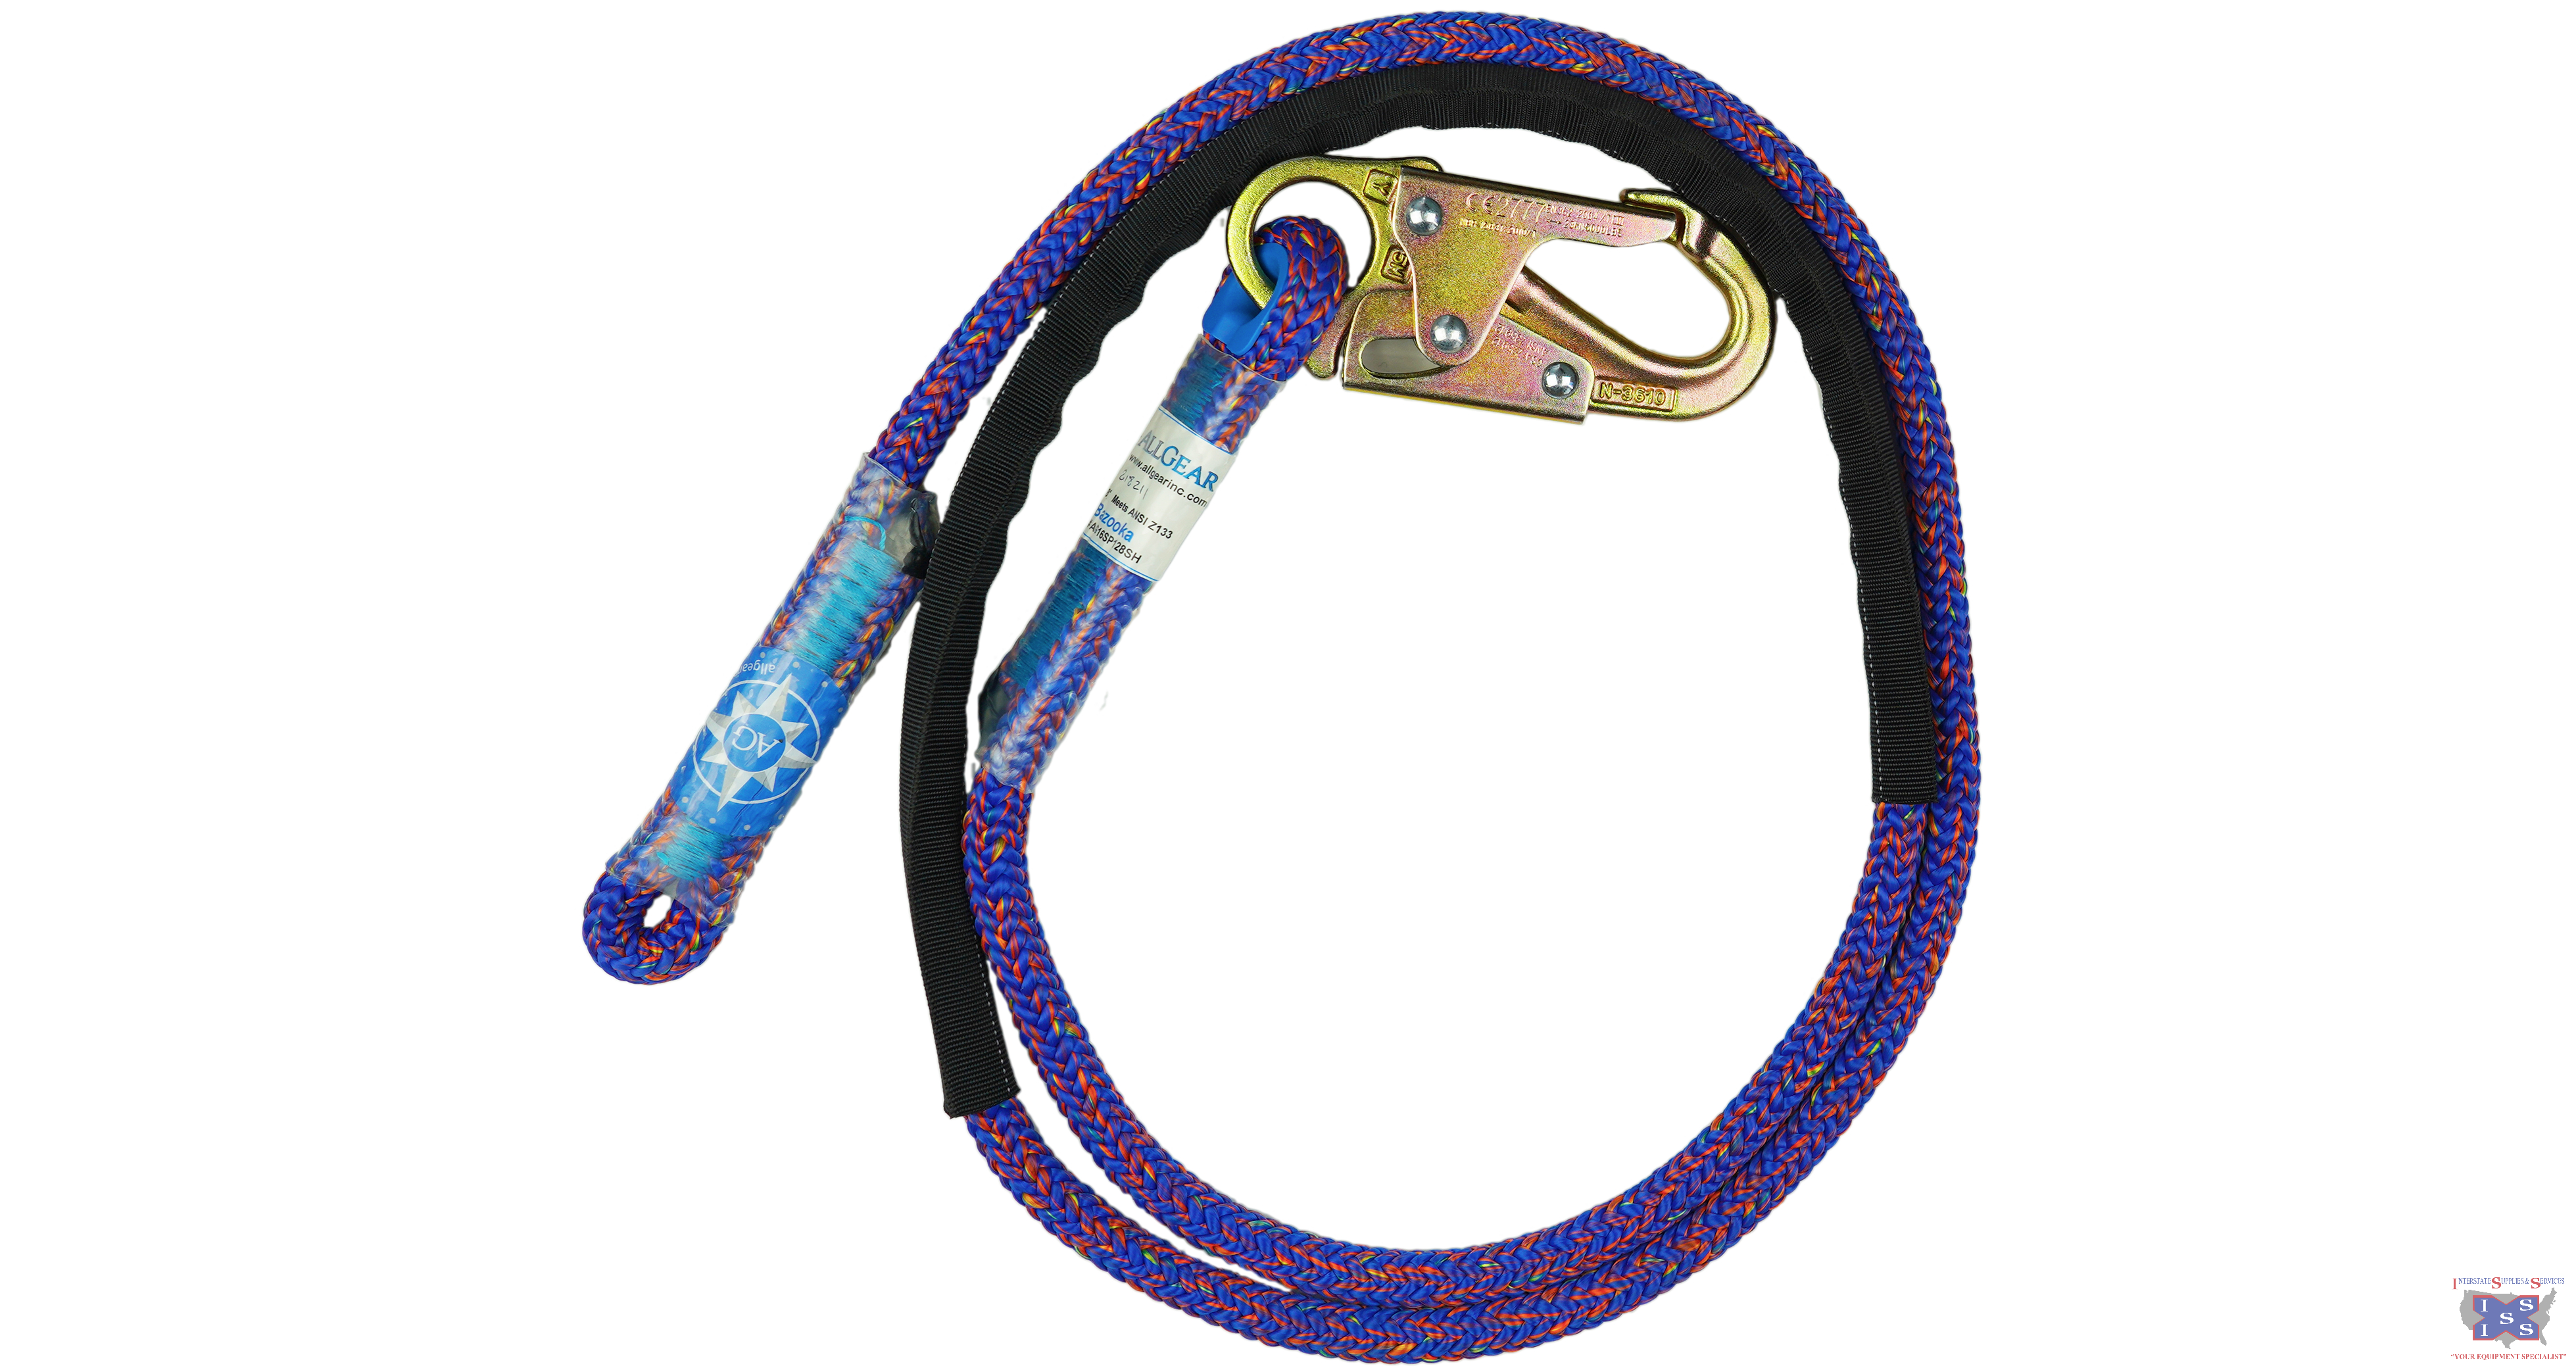 AllGear Extendable Safety Lanyard 1/2" x 10' - Click Image to Close